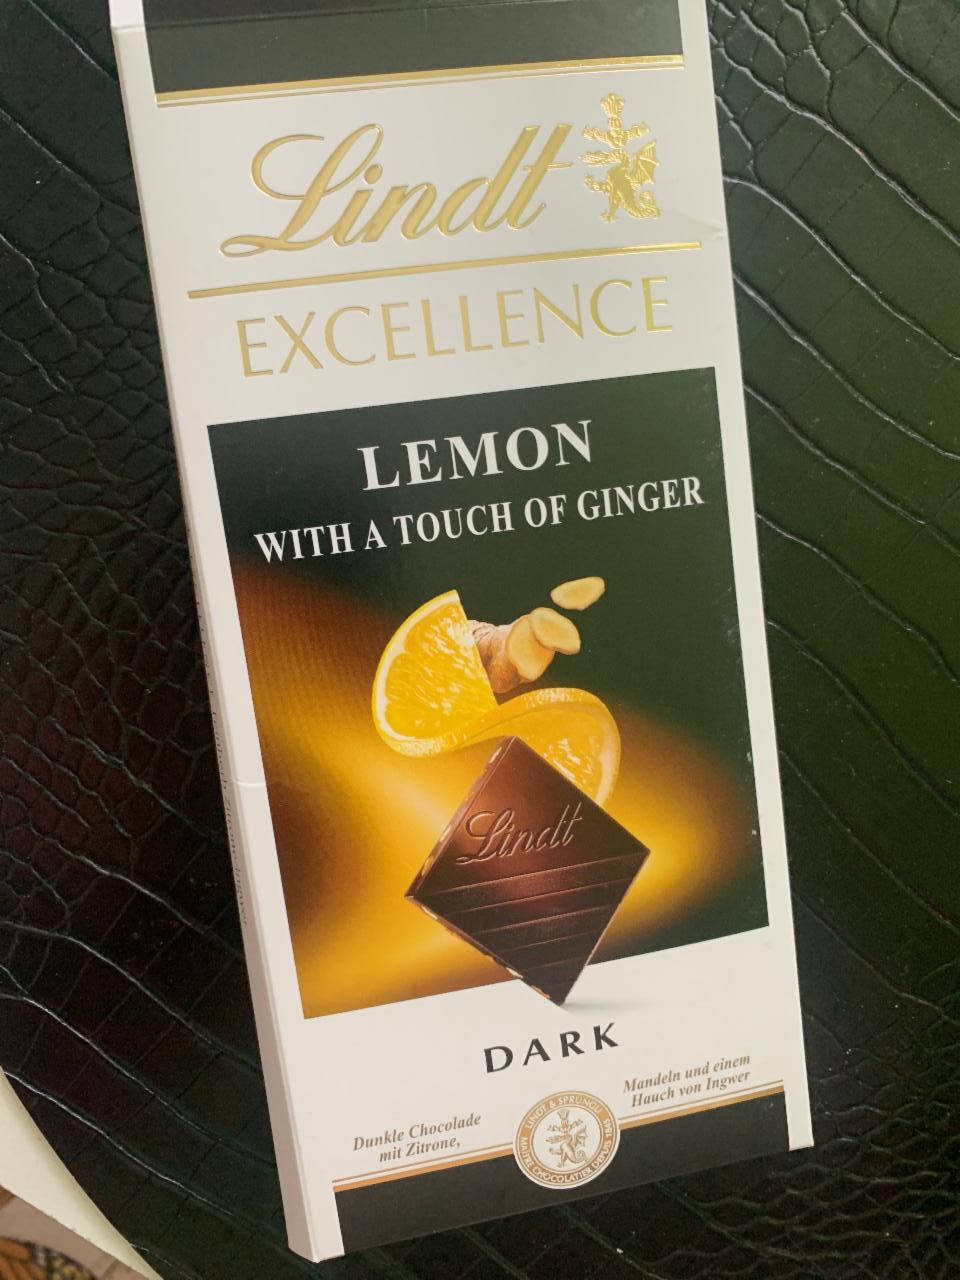 Fotografie - Dark chocolate with Lemon and a touch of Ginger Lindt Excellence